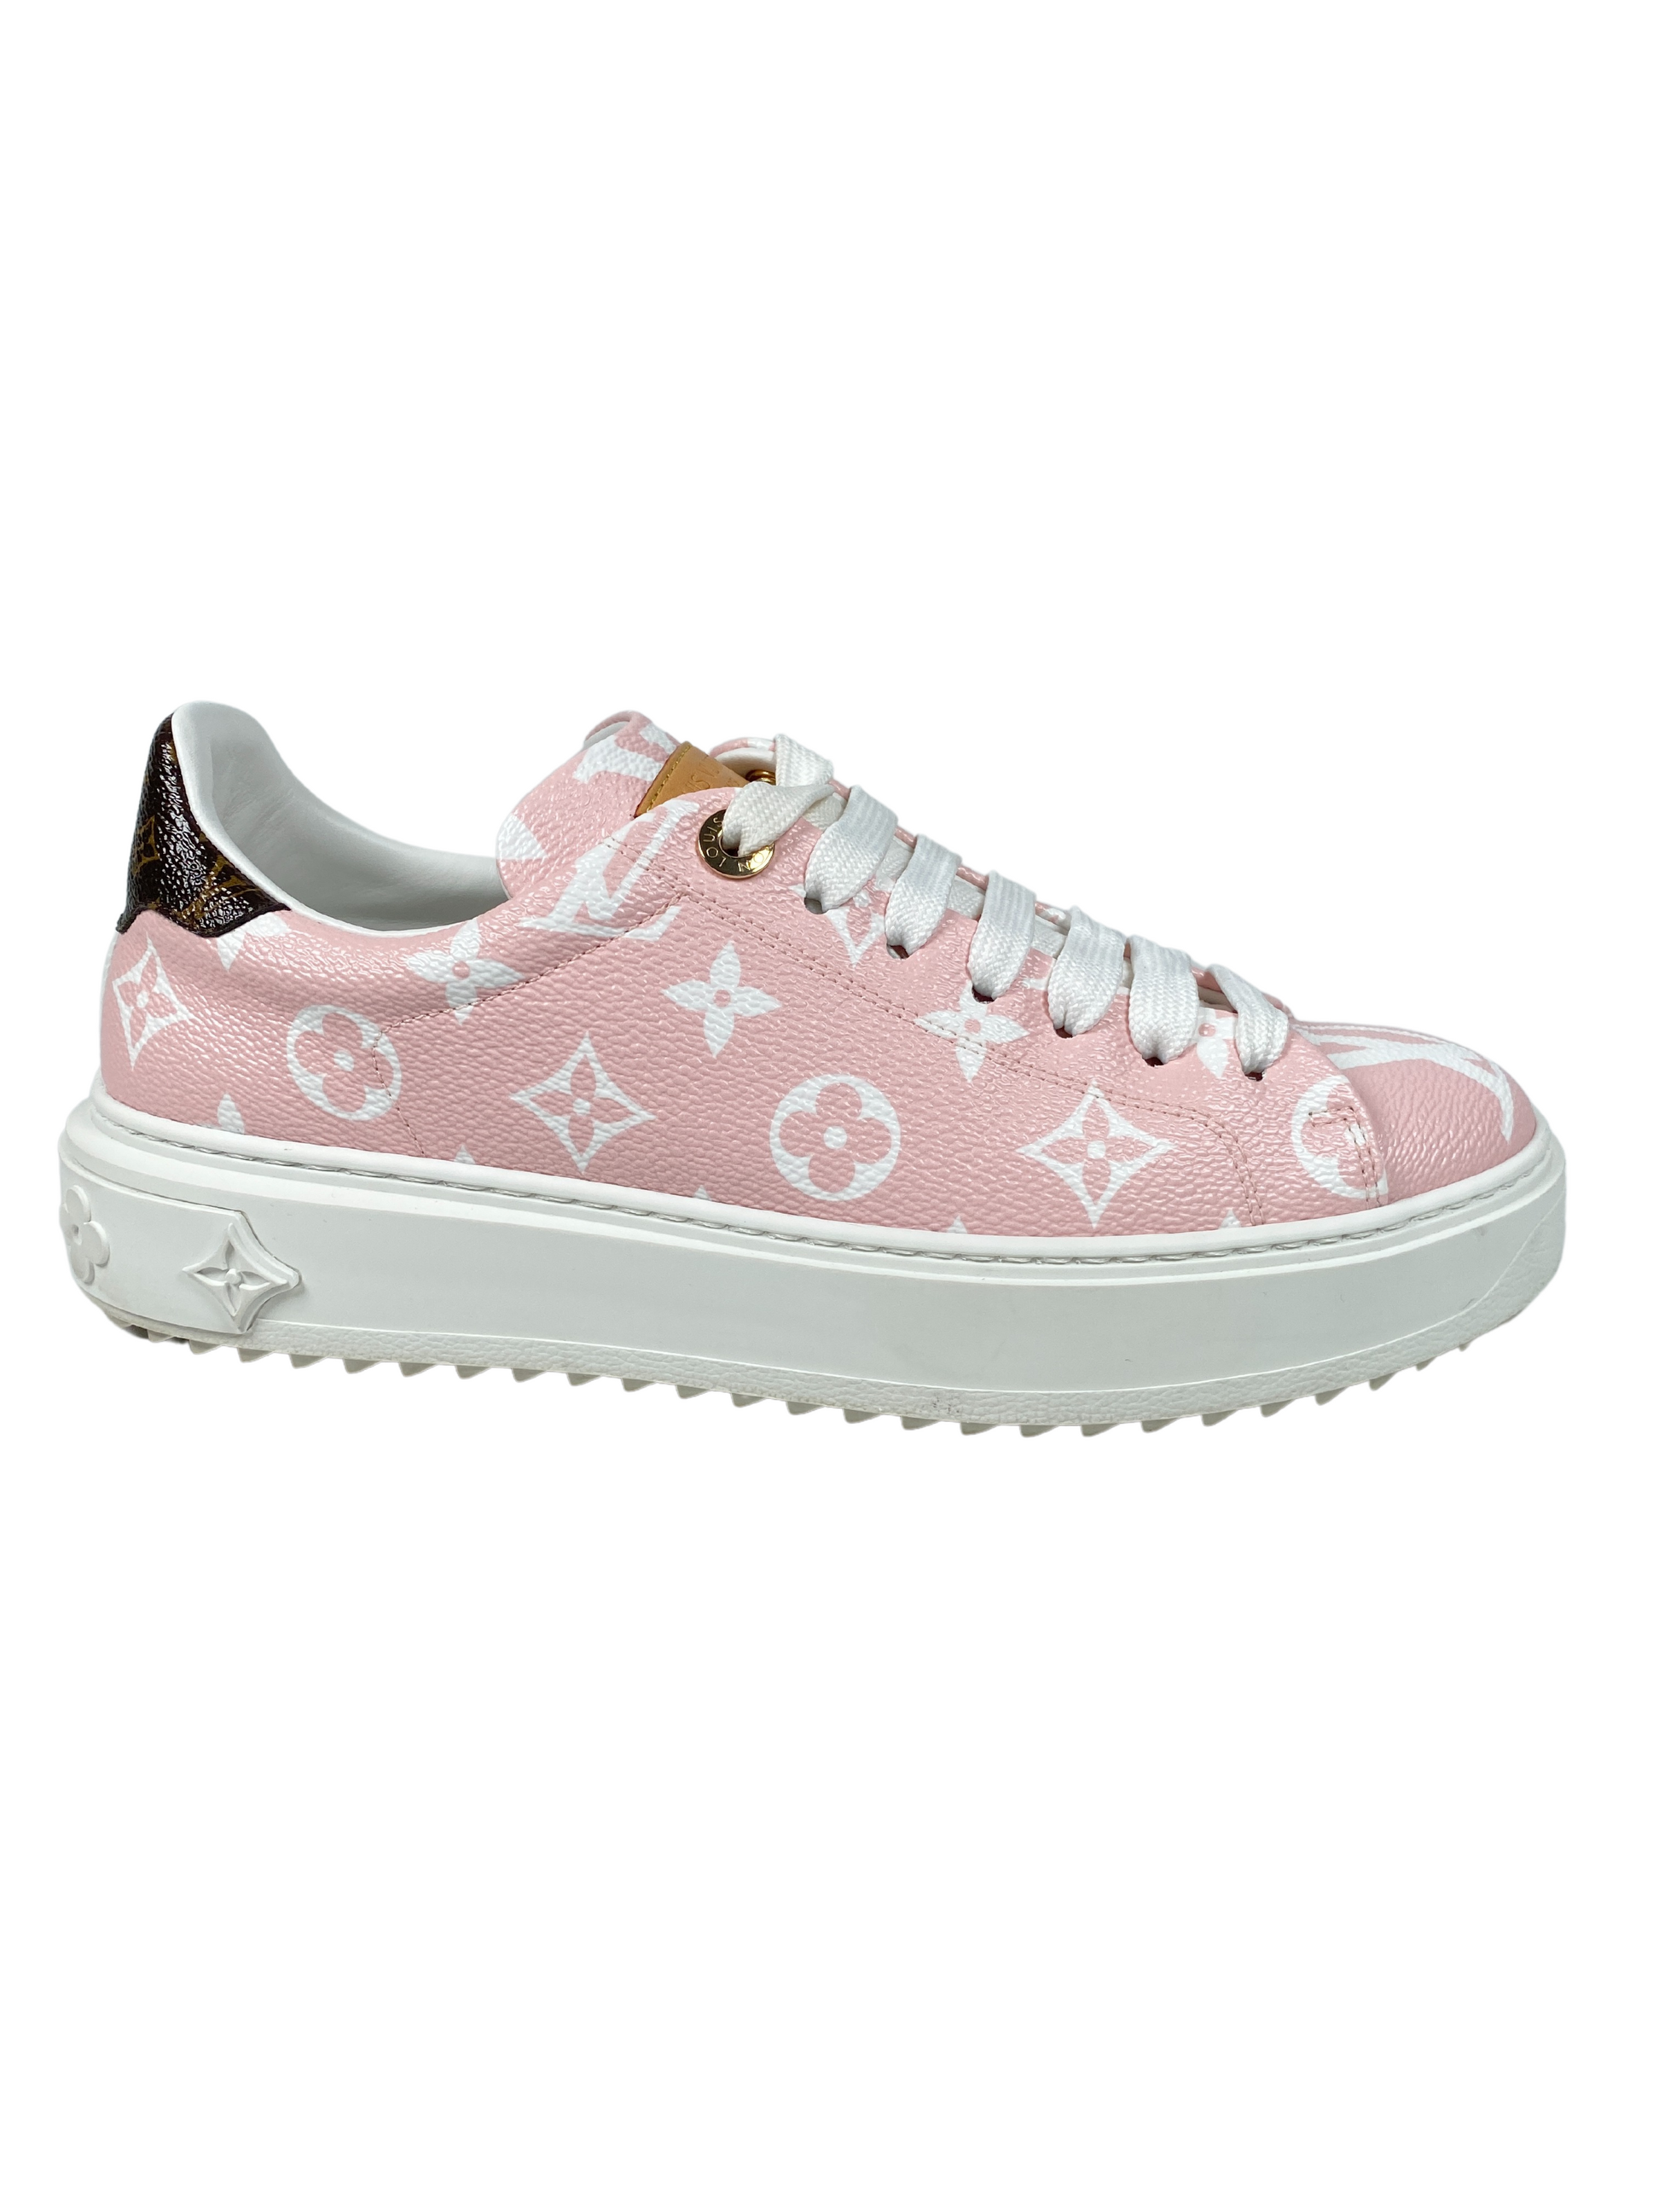 Louis Vuitton - Time Out Sneakers Trainers - Rose Poudre - Women - Size: 38.0 - Luxury